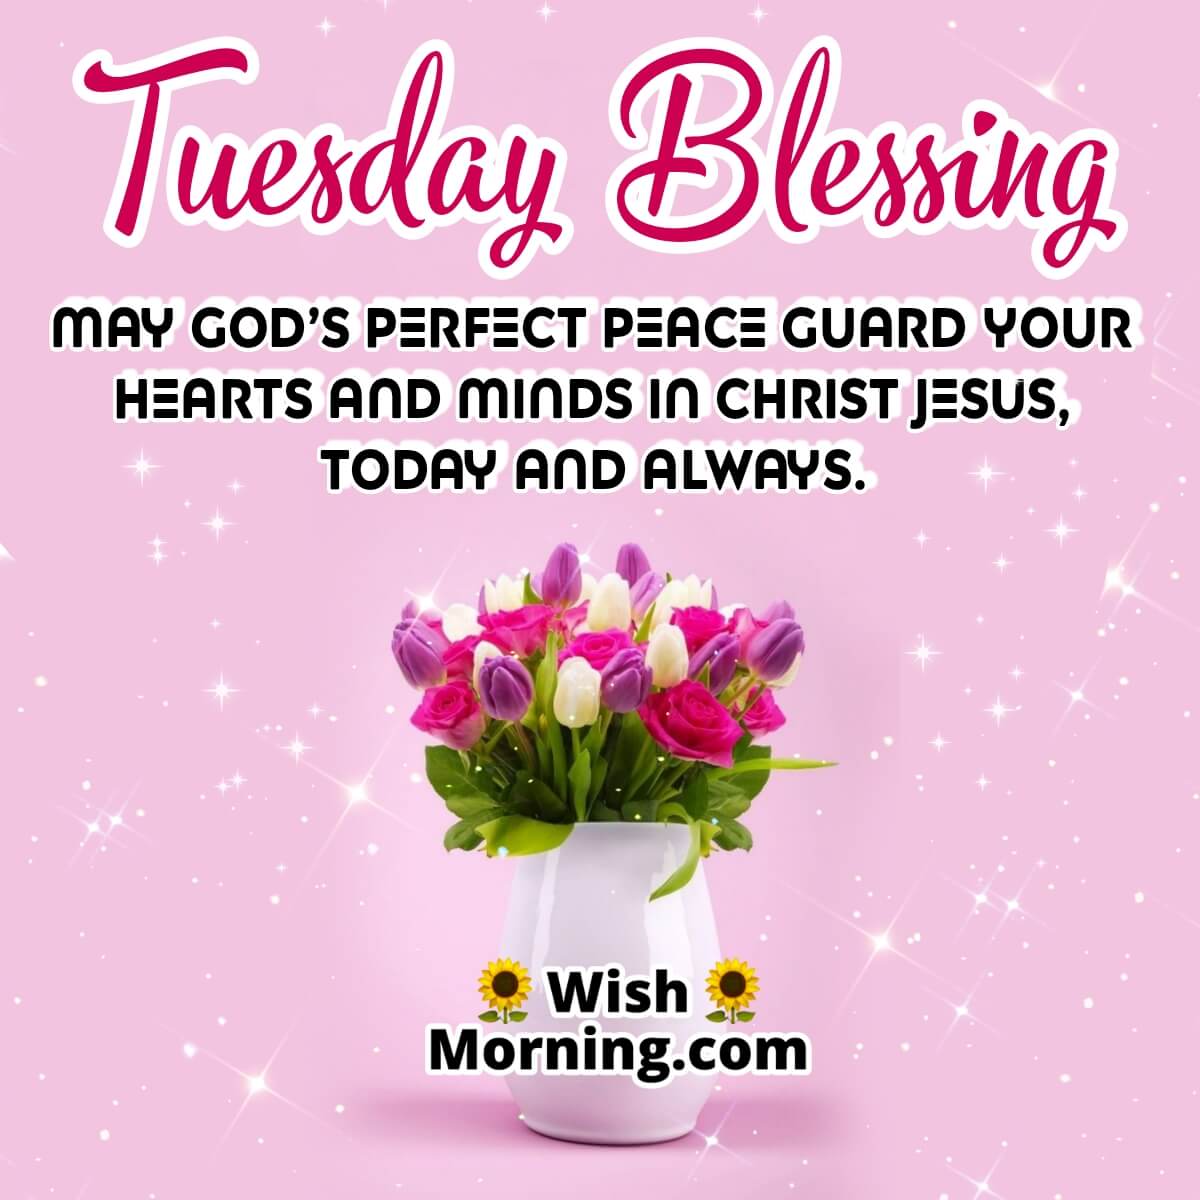 Tuesday Blessing